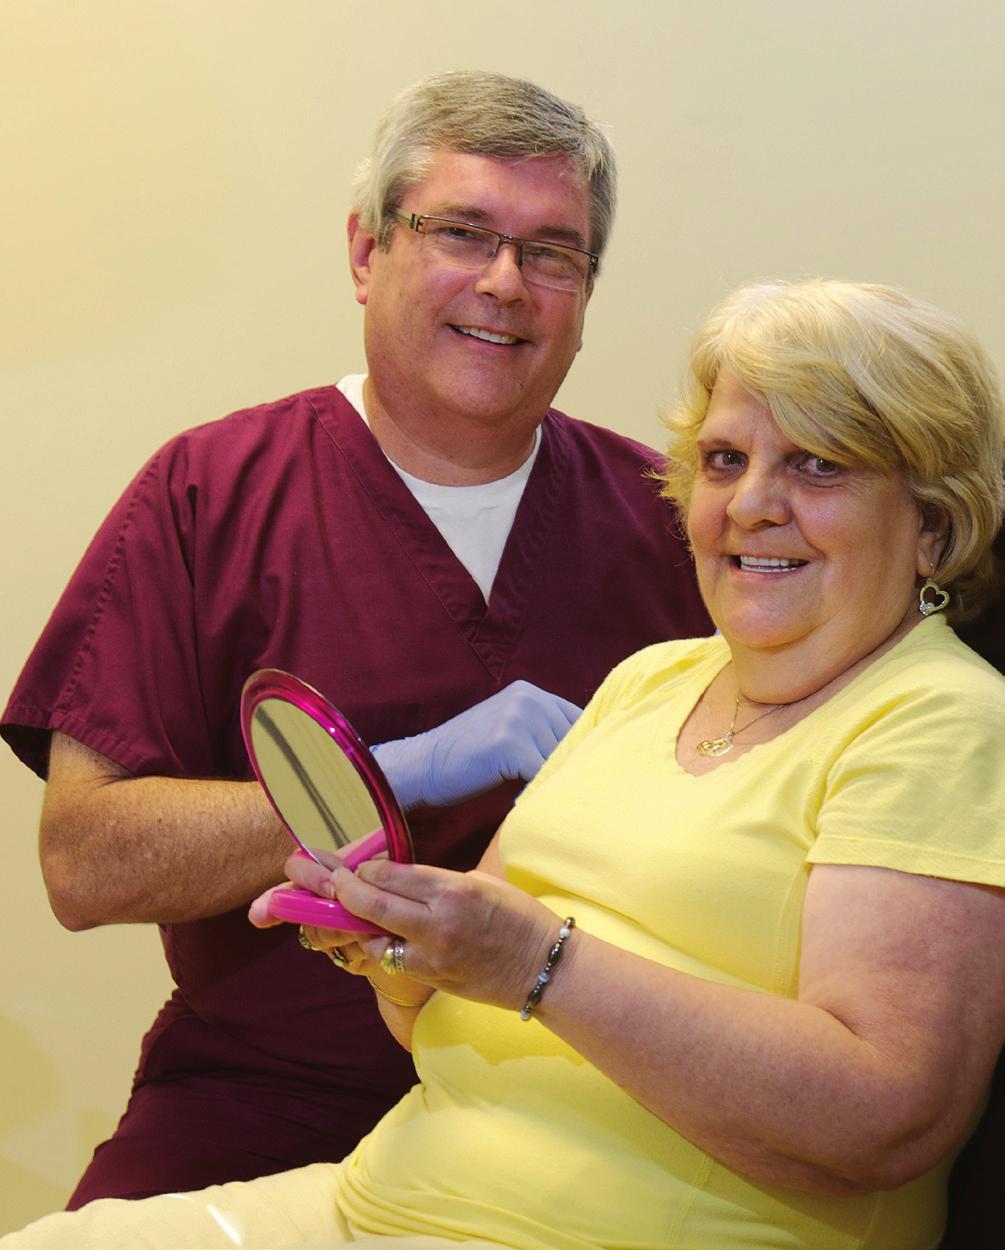 The Dental Clinic After receiving dentures through a joint effort between The Dental Clinic and Allen County Dentures, Leda Favata s life improved in many ways.